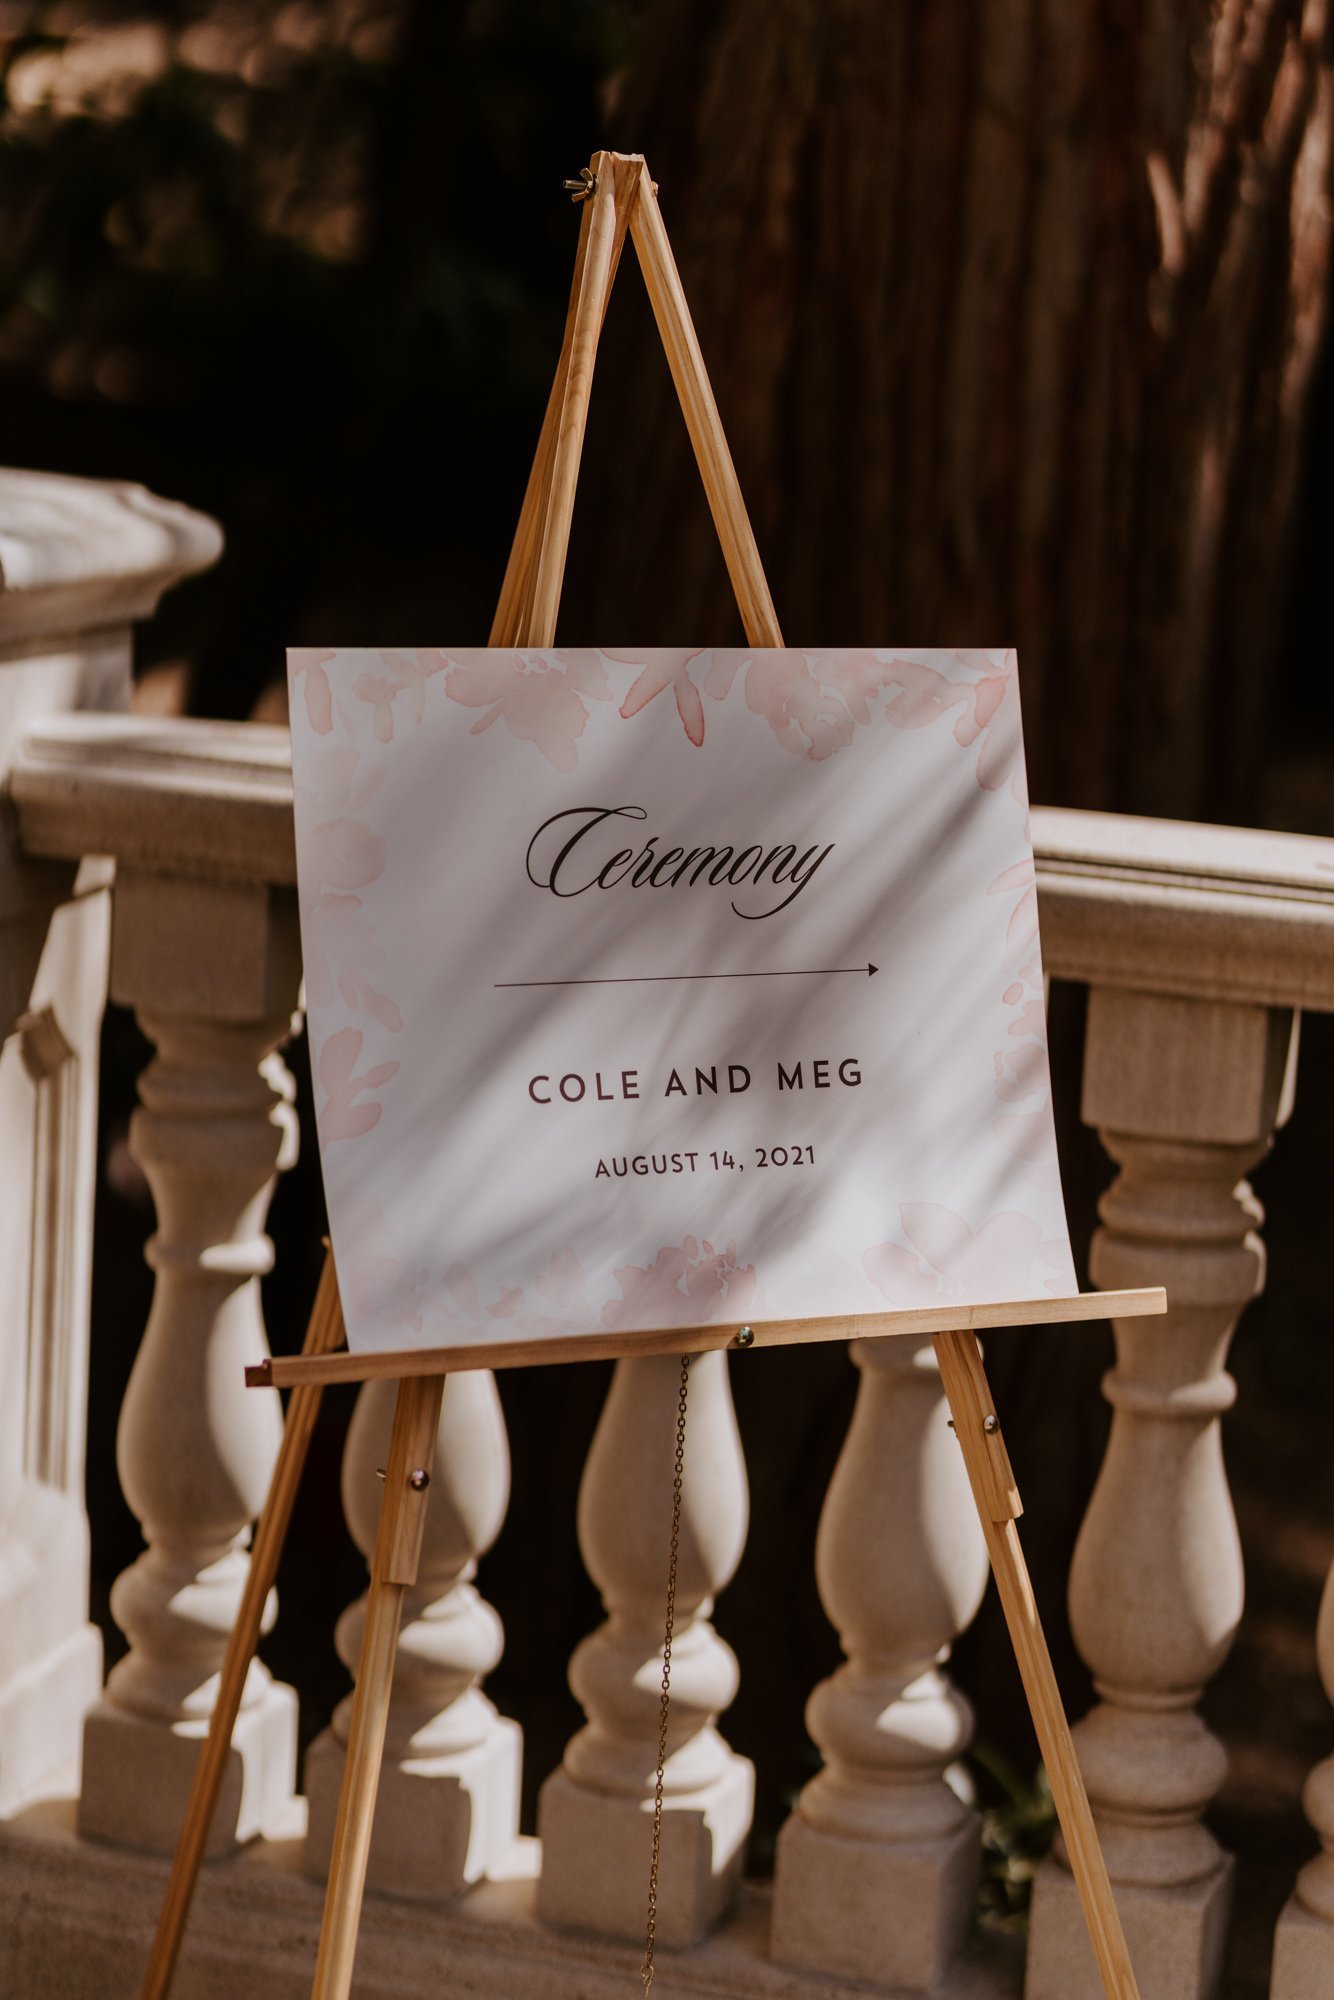 Elegant and simple Wedding ceremony sign, Castle in the forest lake arrowhead airbnb wedding, photo by Tida Svy